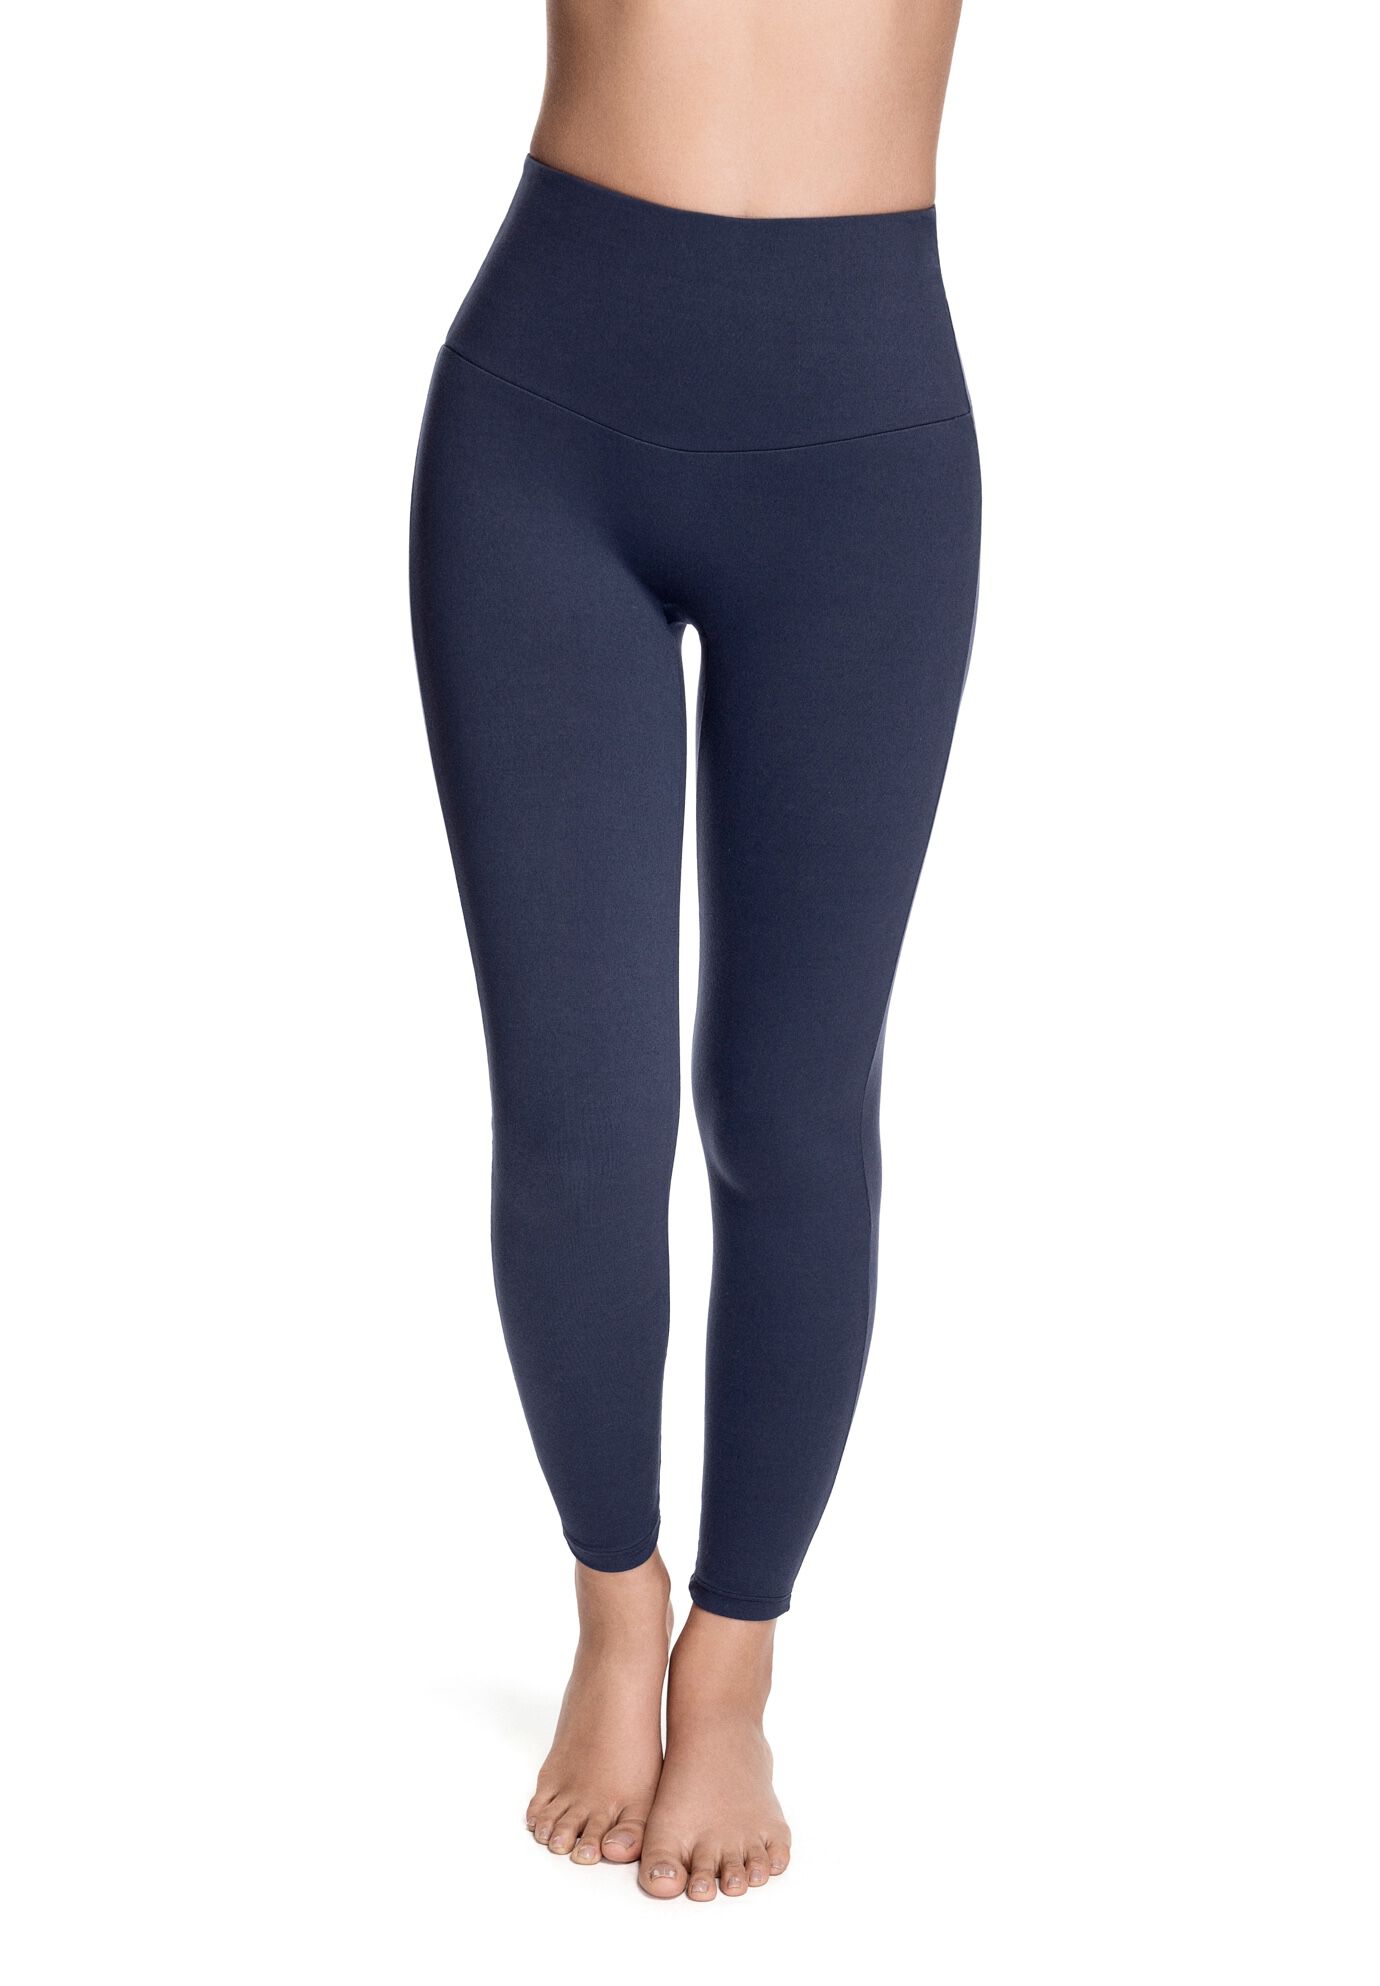 Plus Size Women's Bossa Essence High Rise Legging by Squeem in Midnight Blue (Size XS)